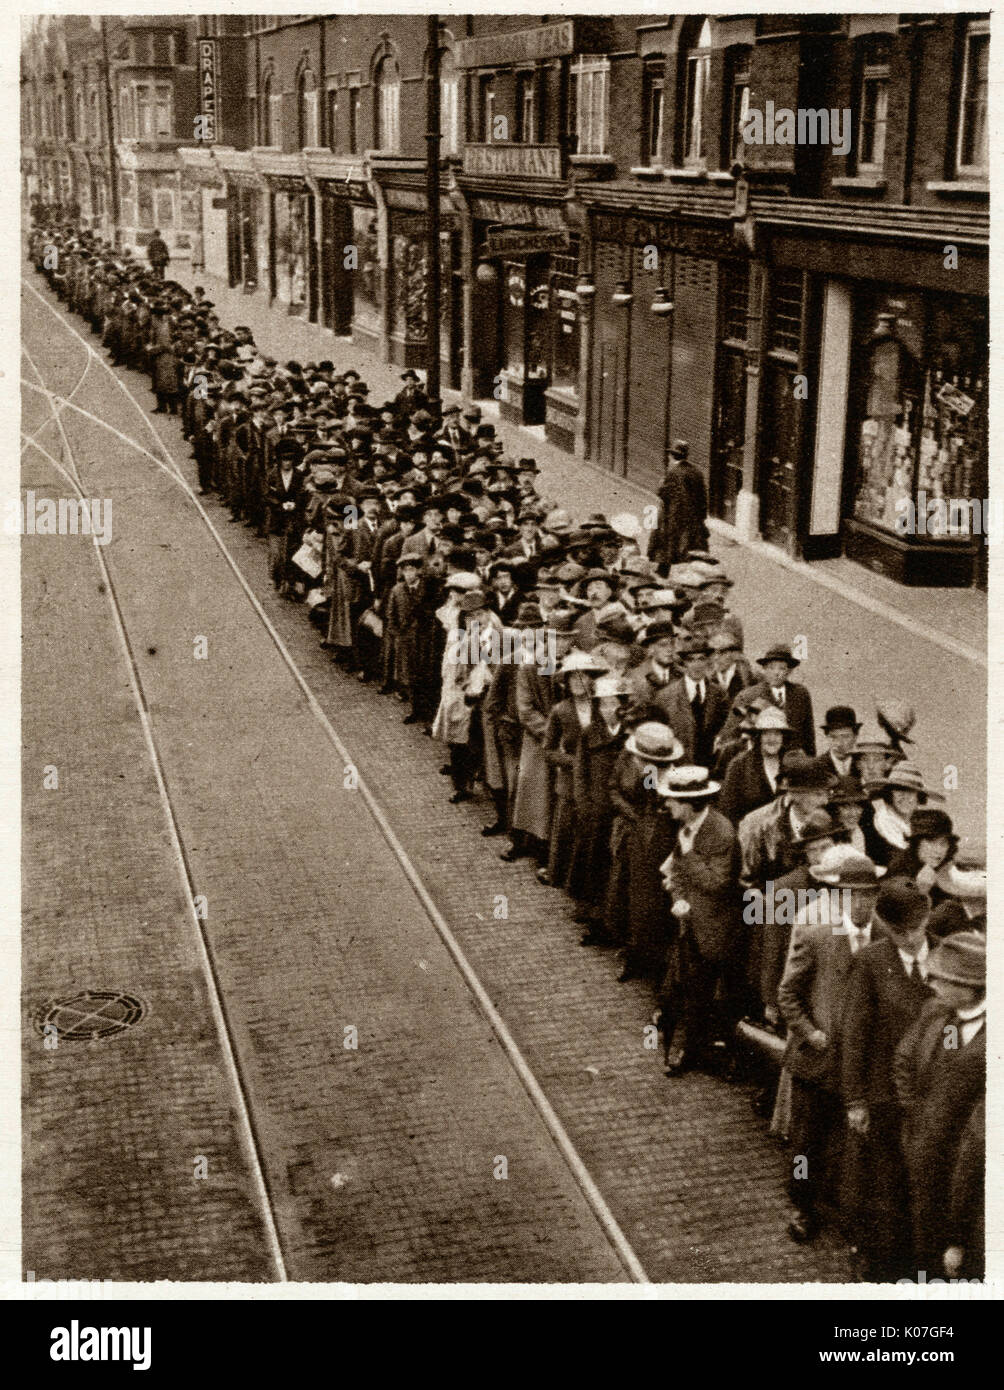 Hundreds of commuters in london queing patiently for the already over utilsed tram-car.     Date: October 1919 Stock Photo